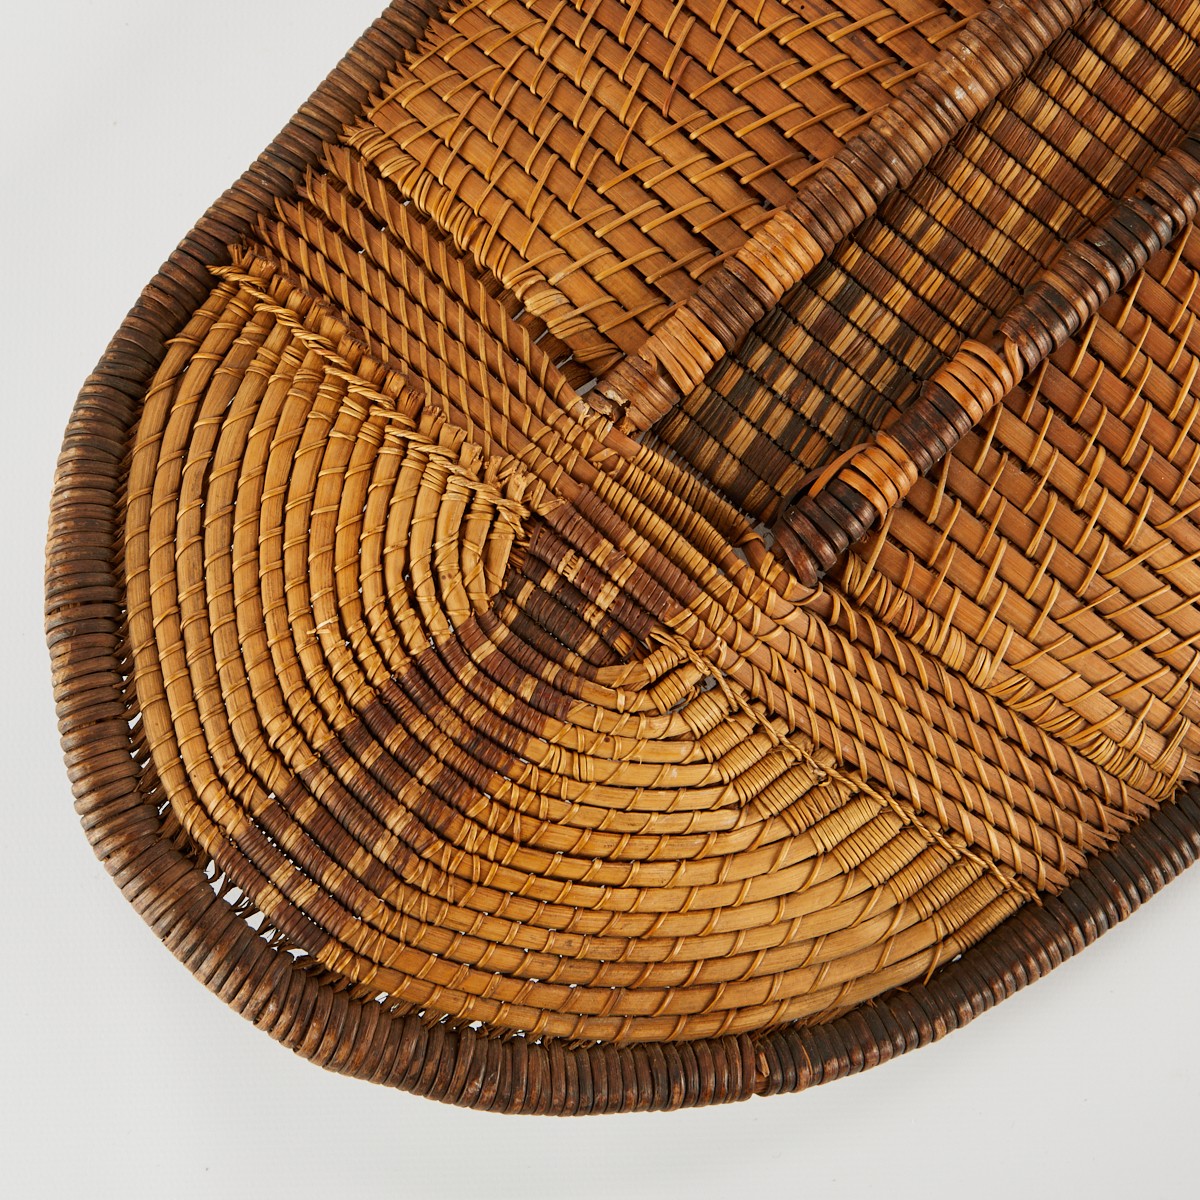 African Congo Woven Shield - Image 4 of 6